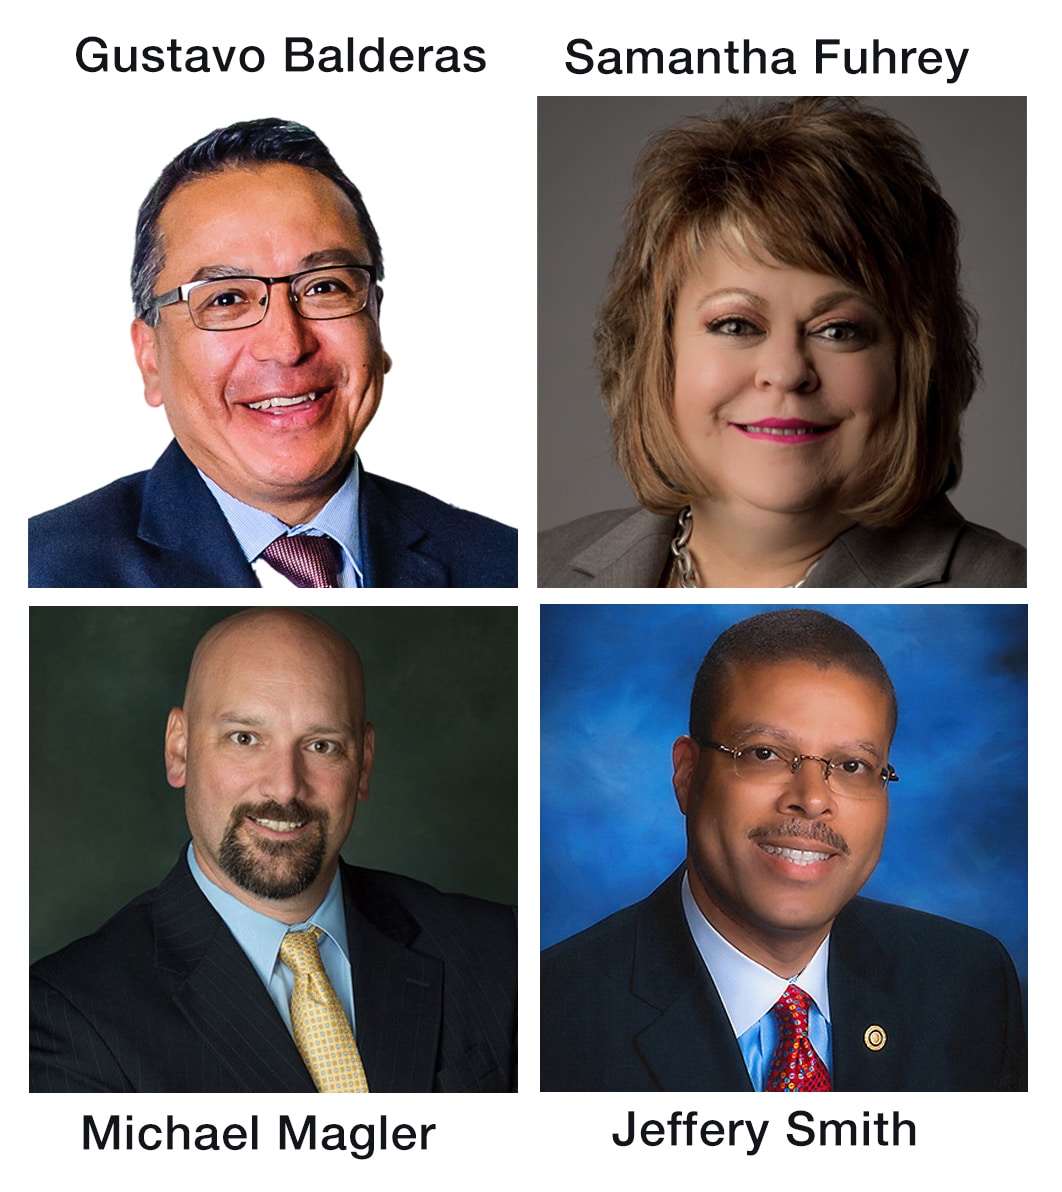 finalists for the 2020 National Superintendent of the Year